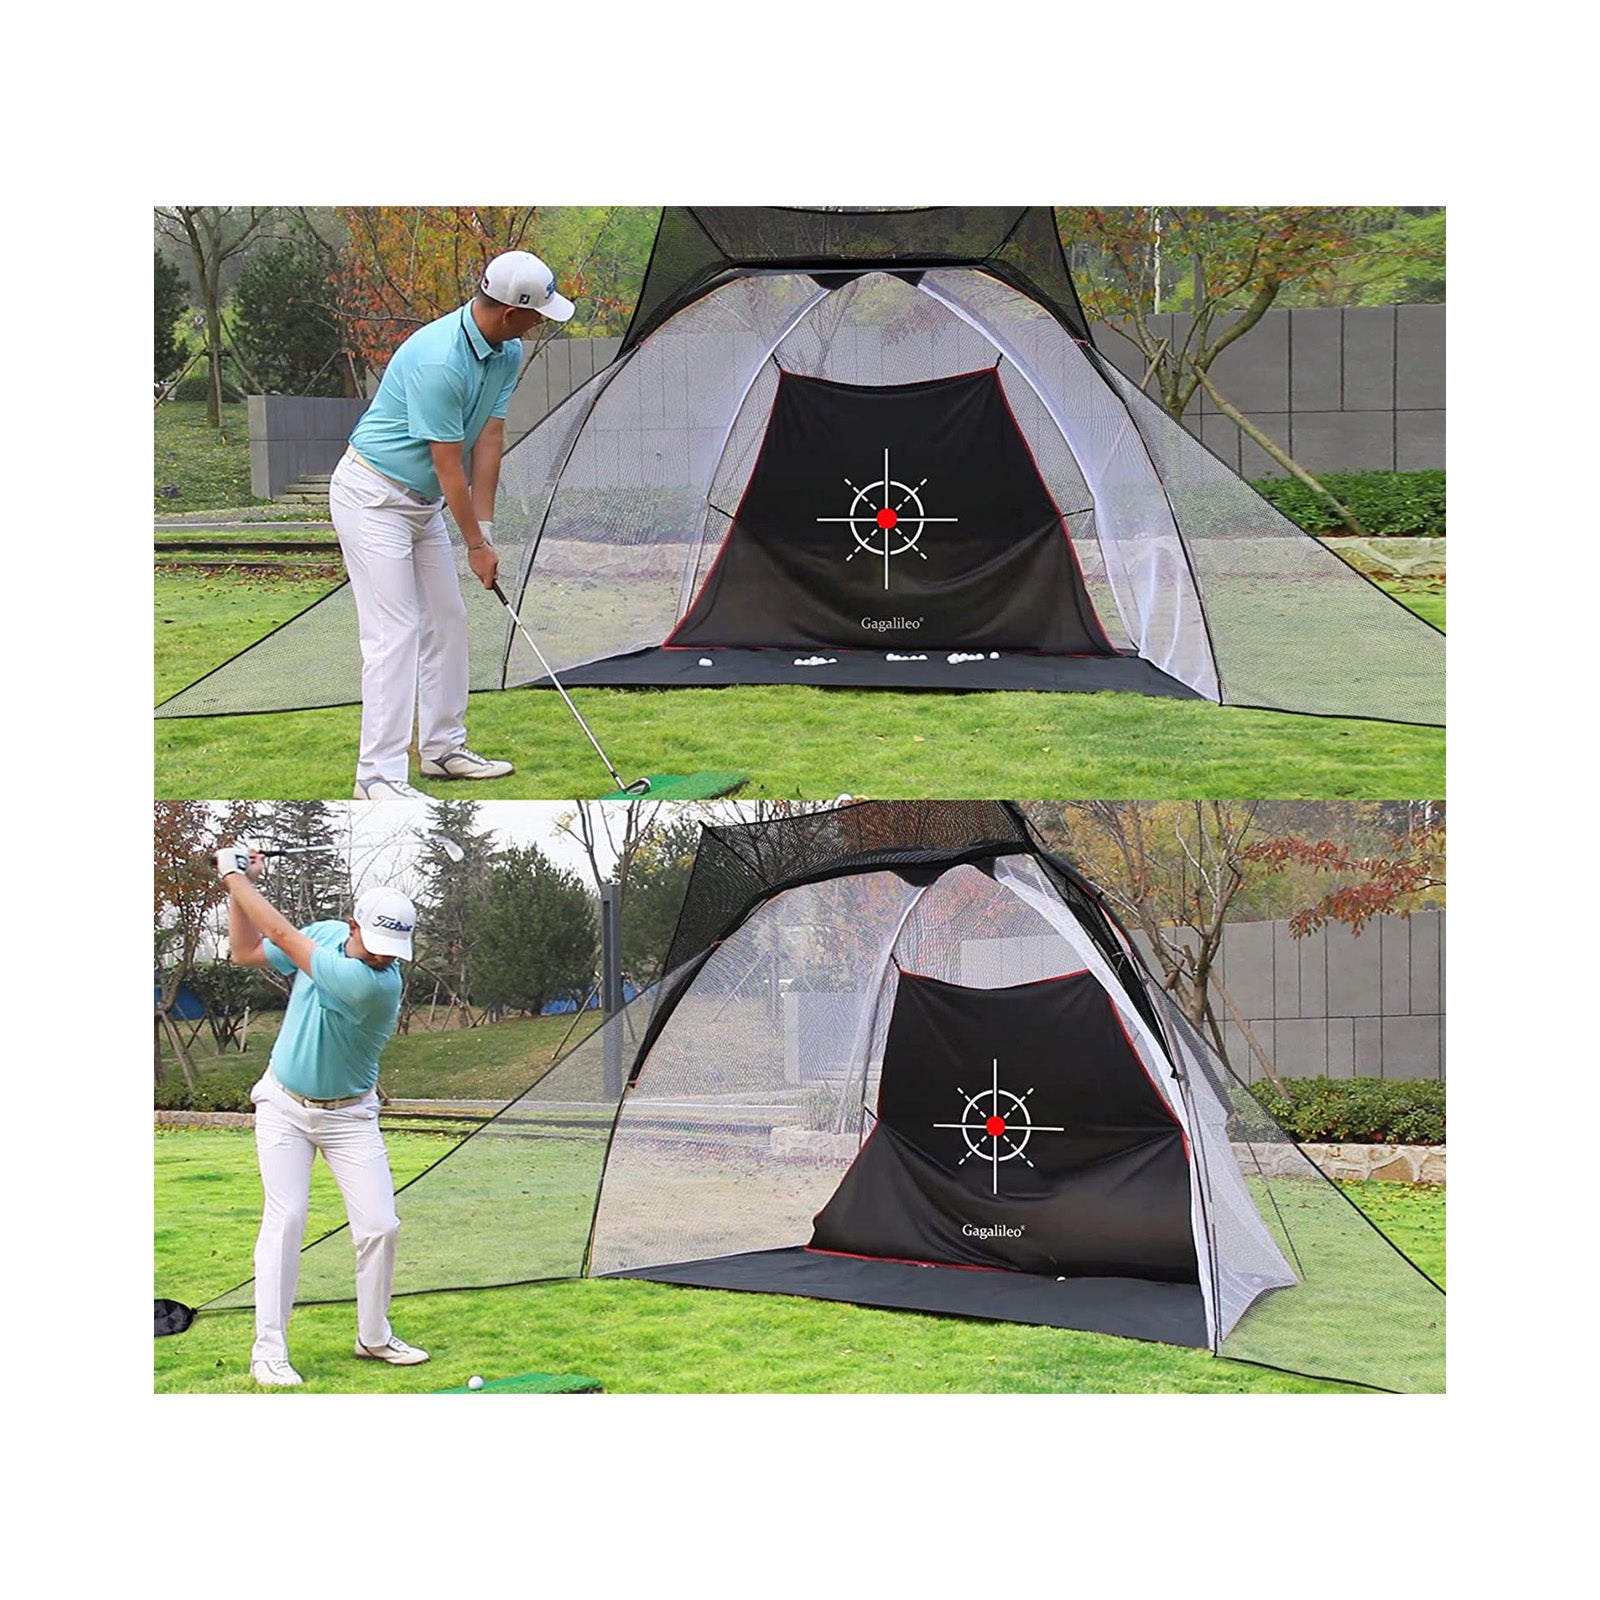 10x7x6 Golf Hitting Net System with Roof and Barrier Net/White